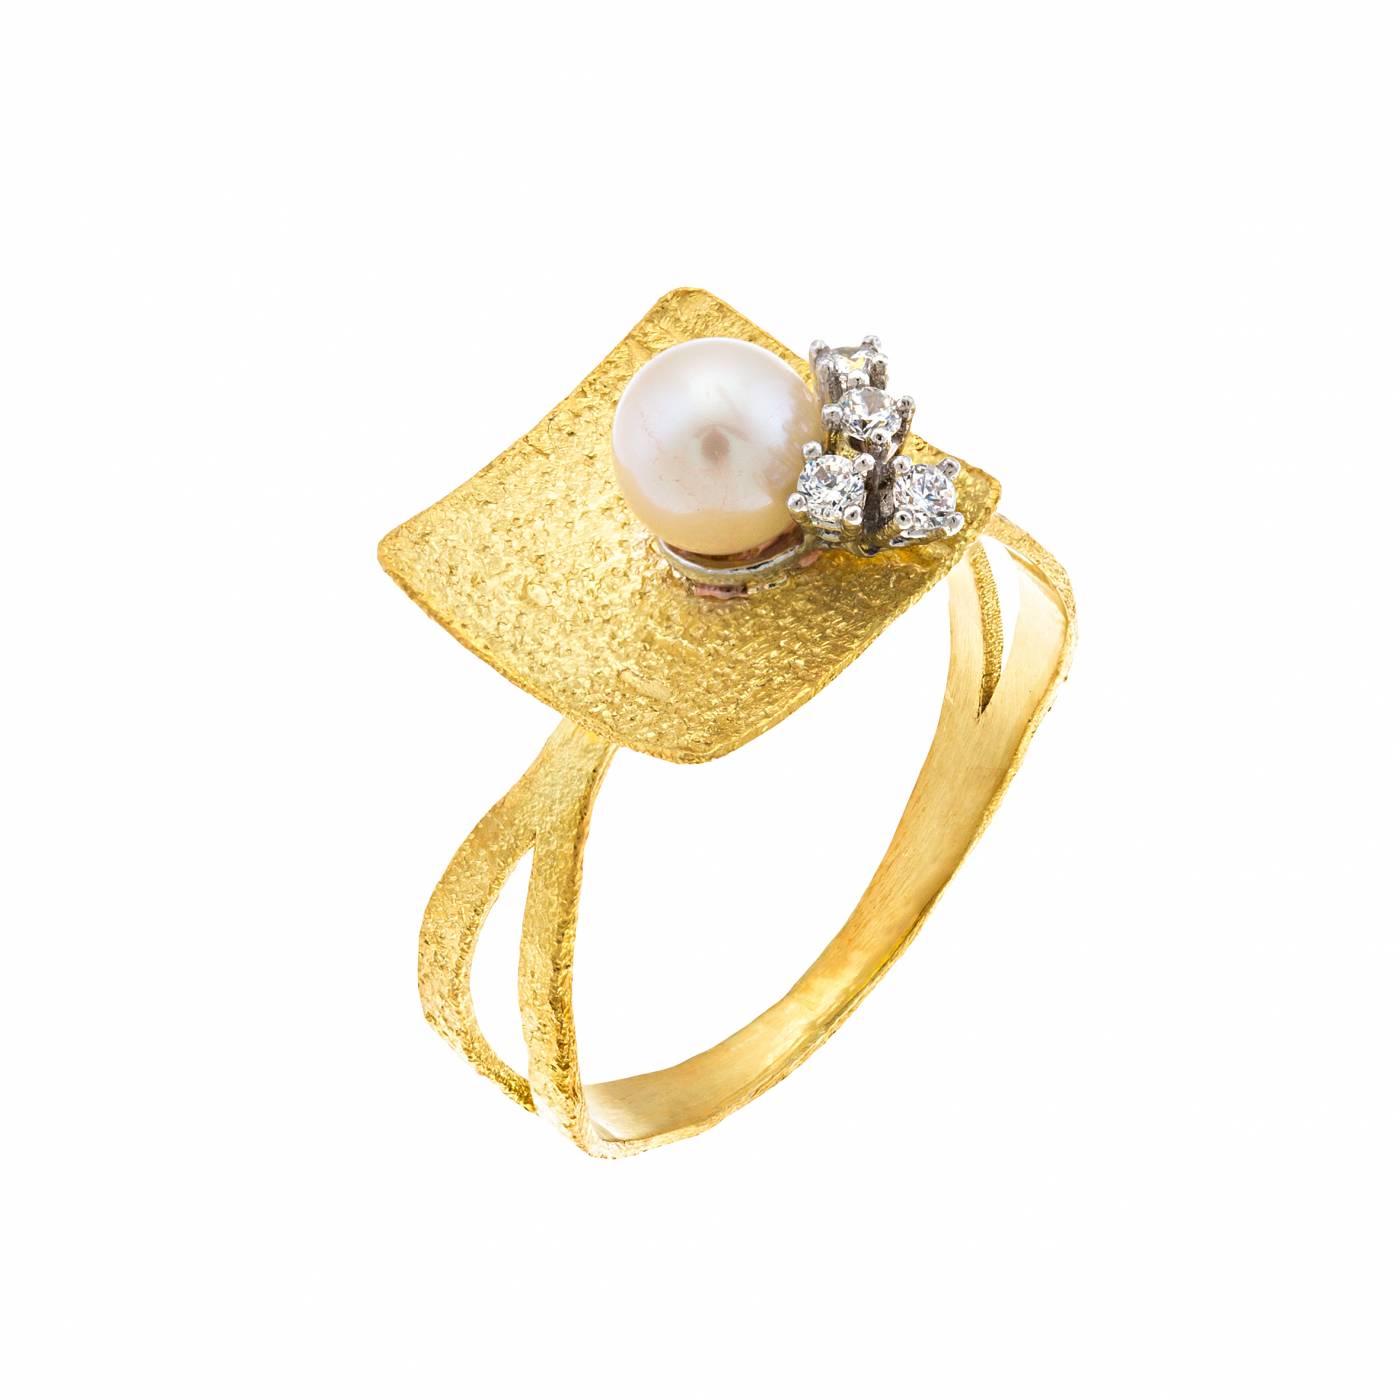 GOLD 14K HANDMADE RING WITH ZIRGON AND PEARL